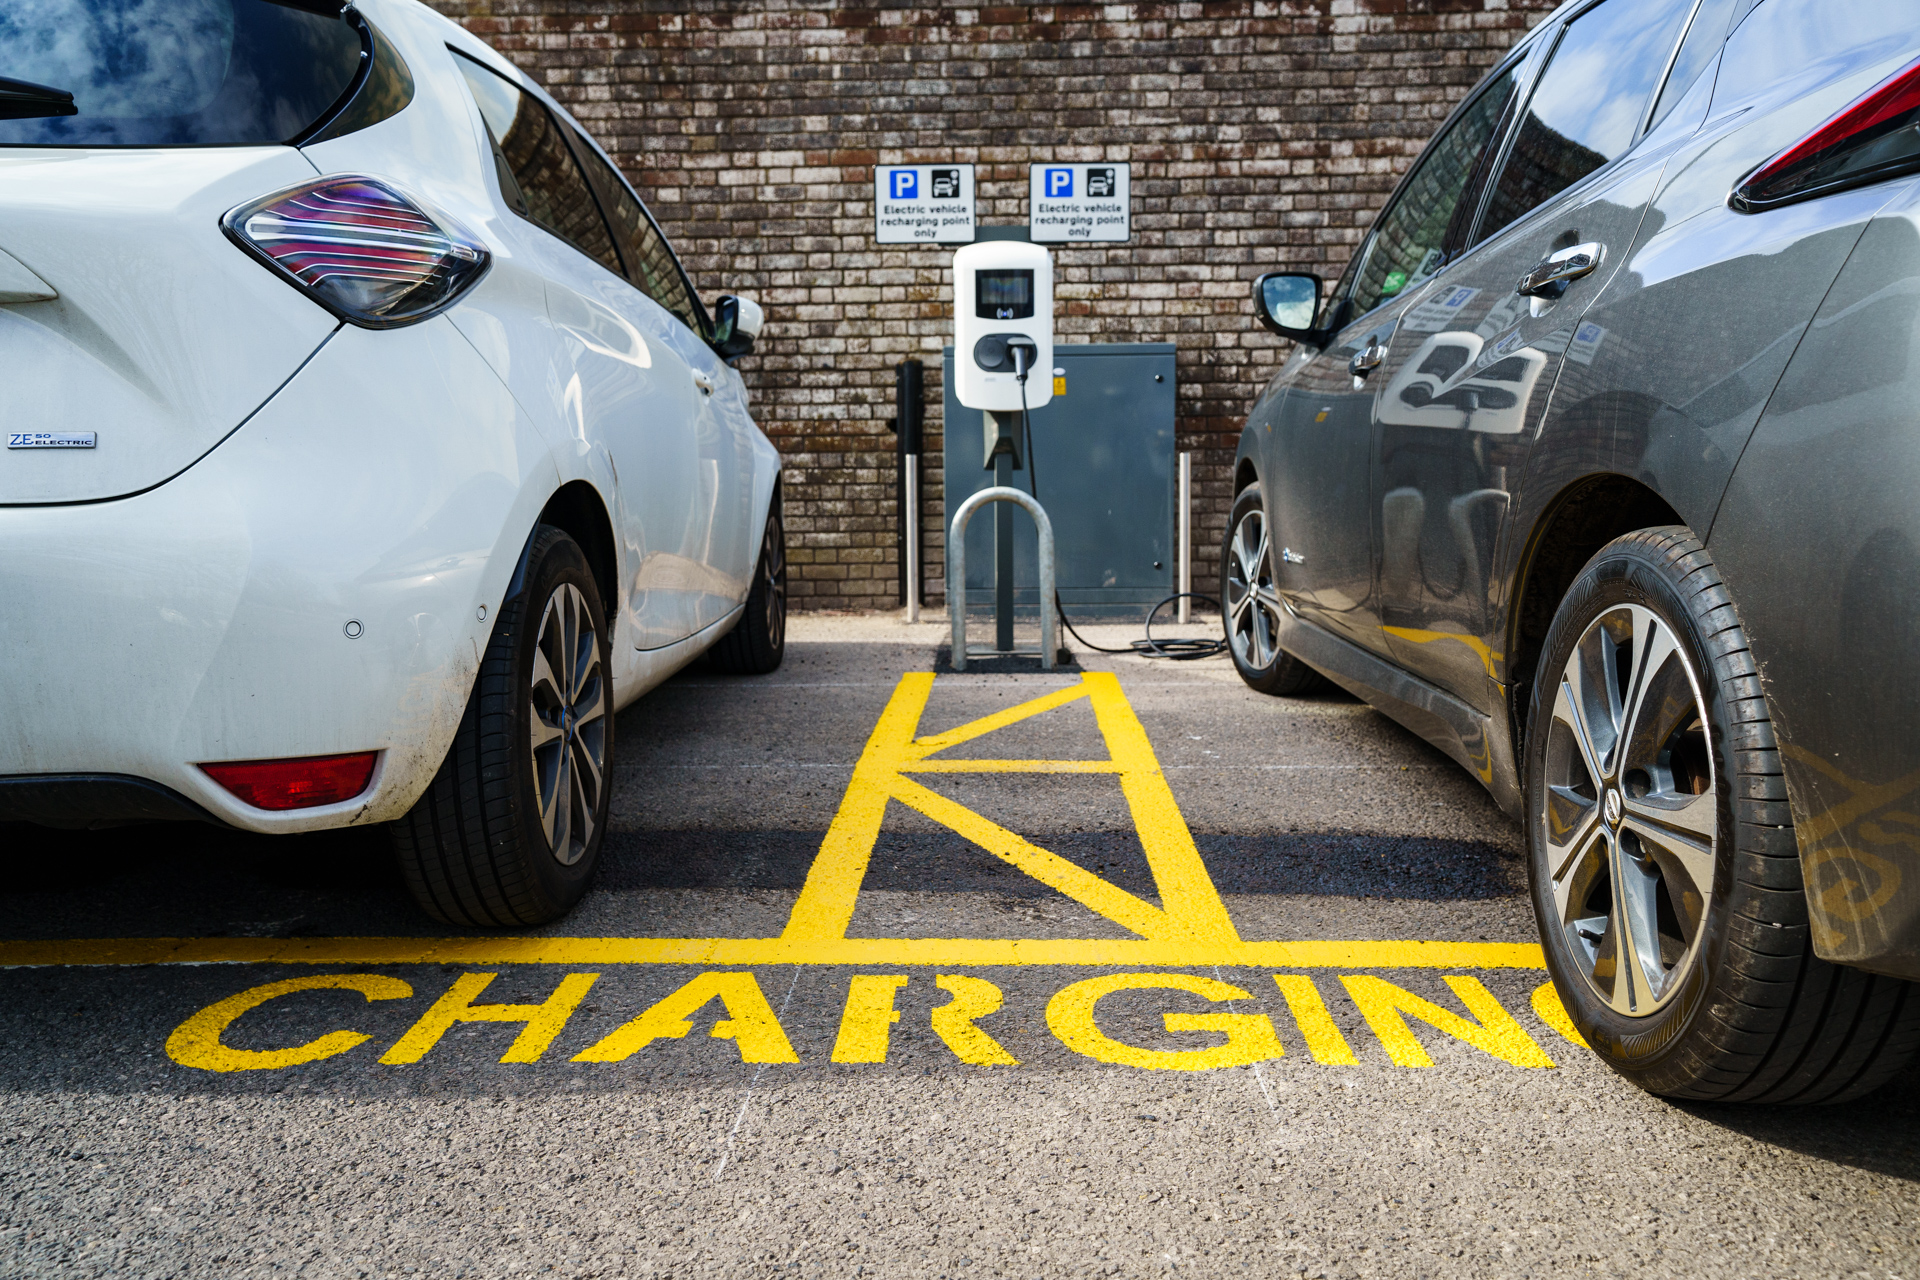 Cars in electric vehicle charging bay